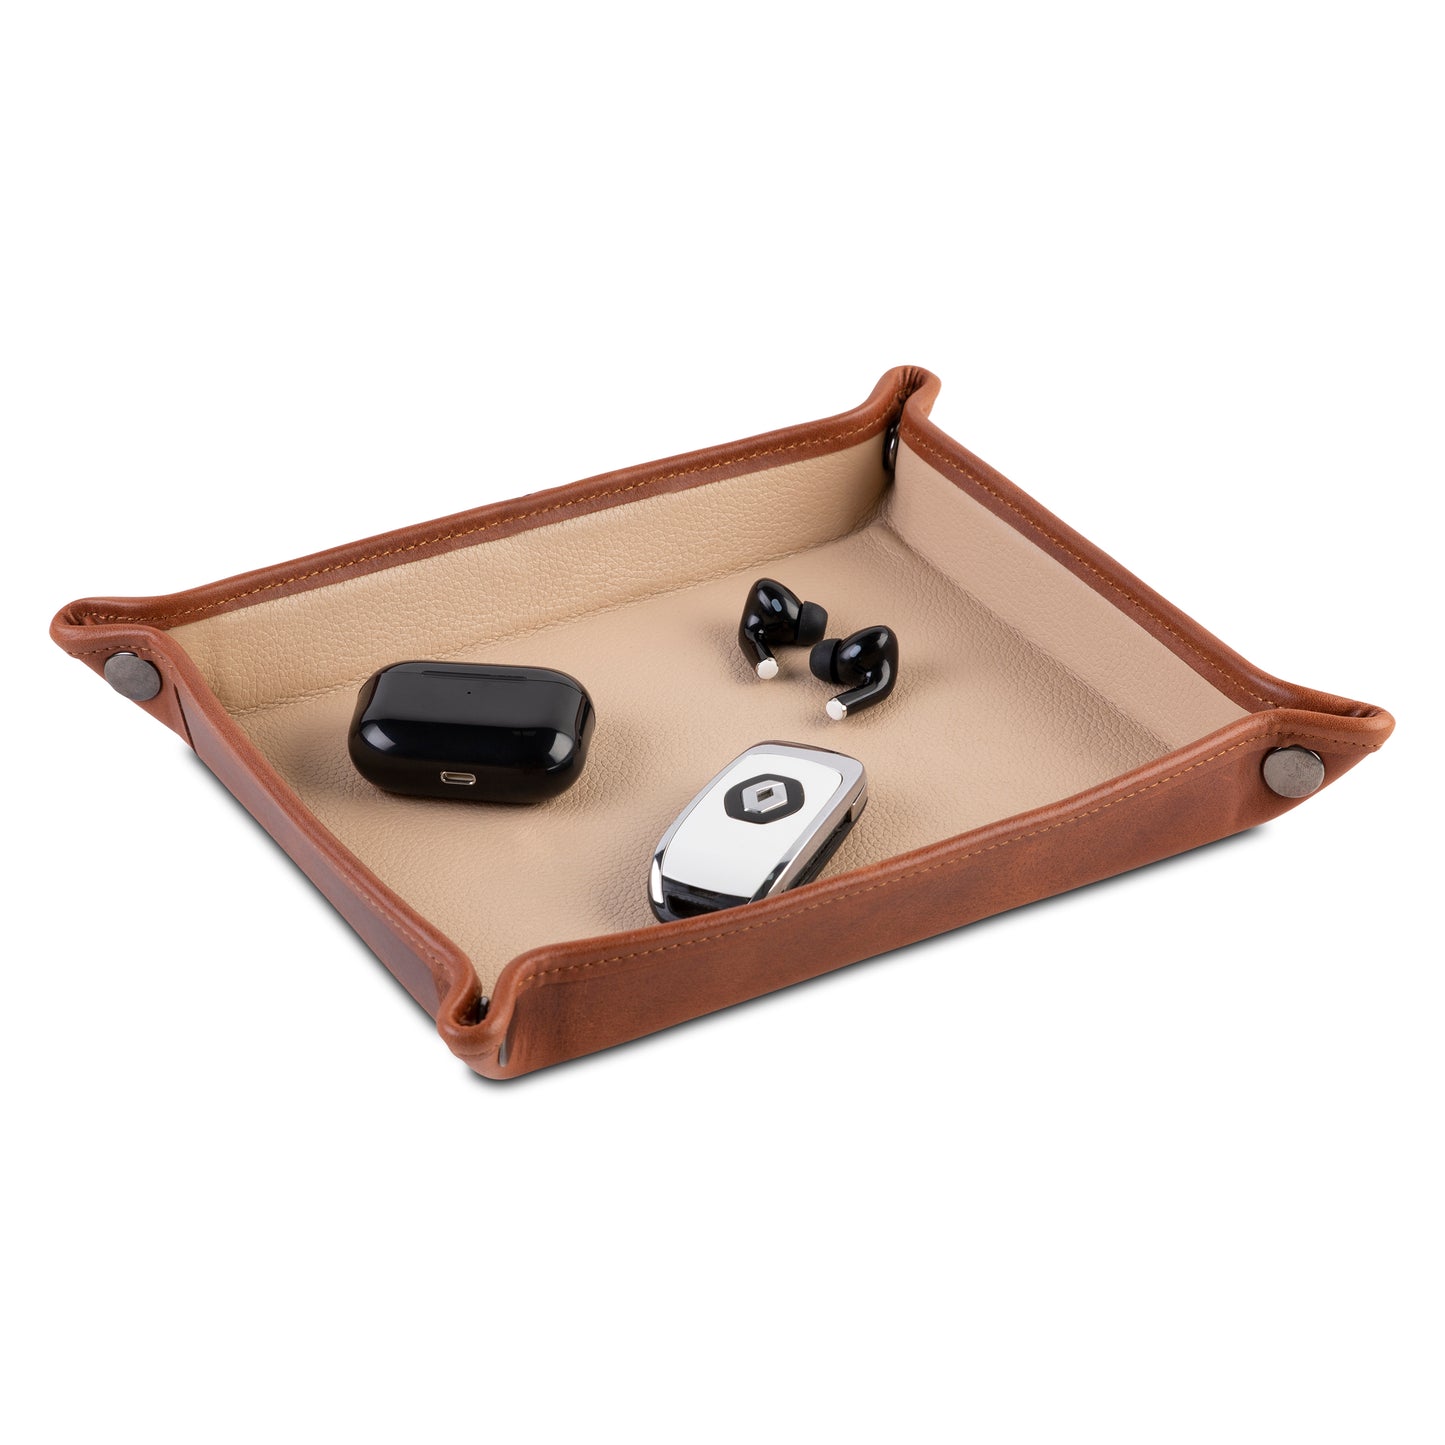 Full Leather Tray - 2 Color Deluxe